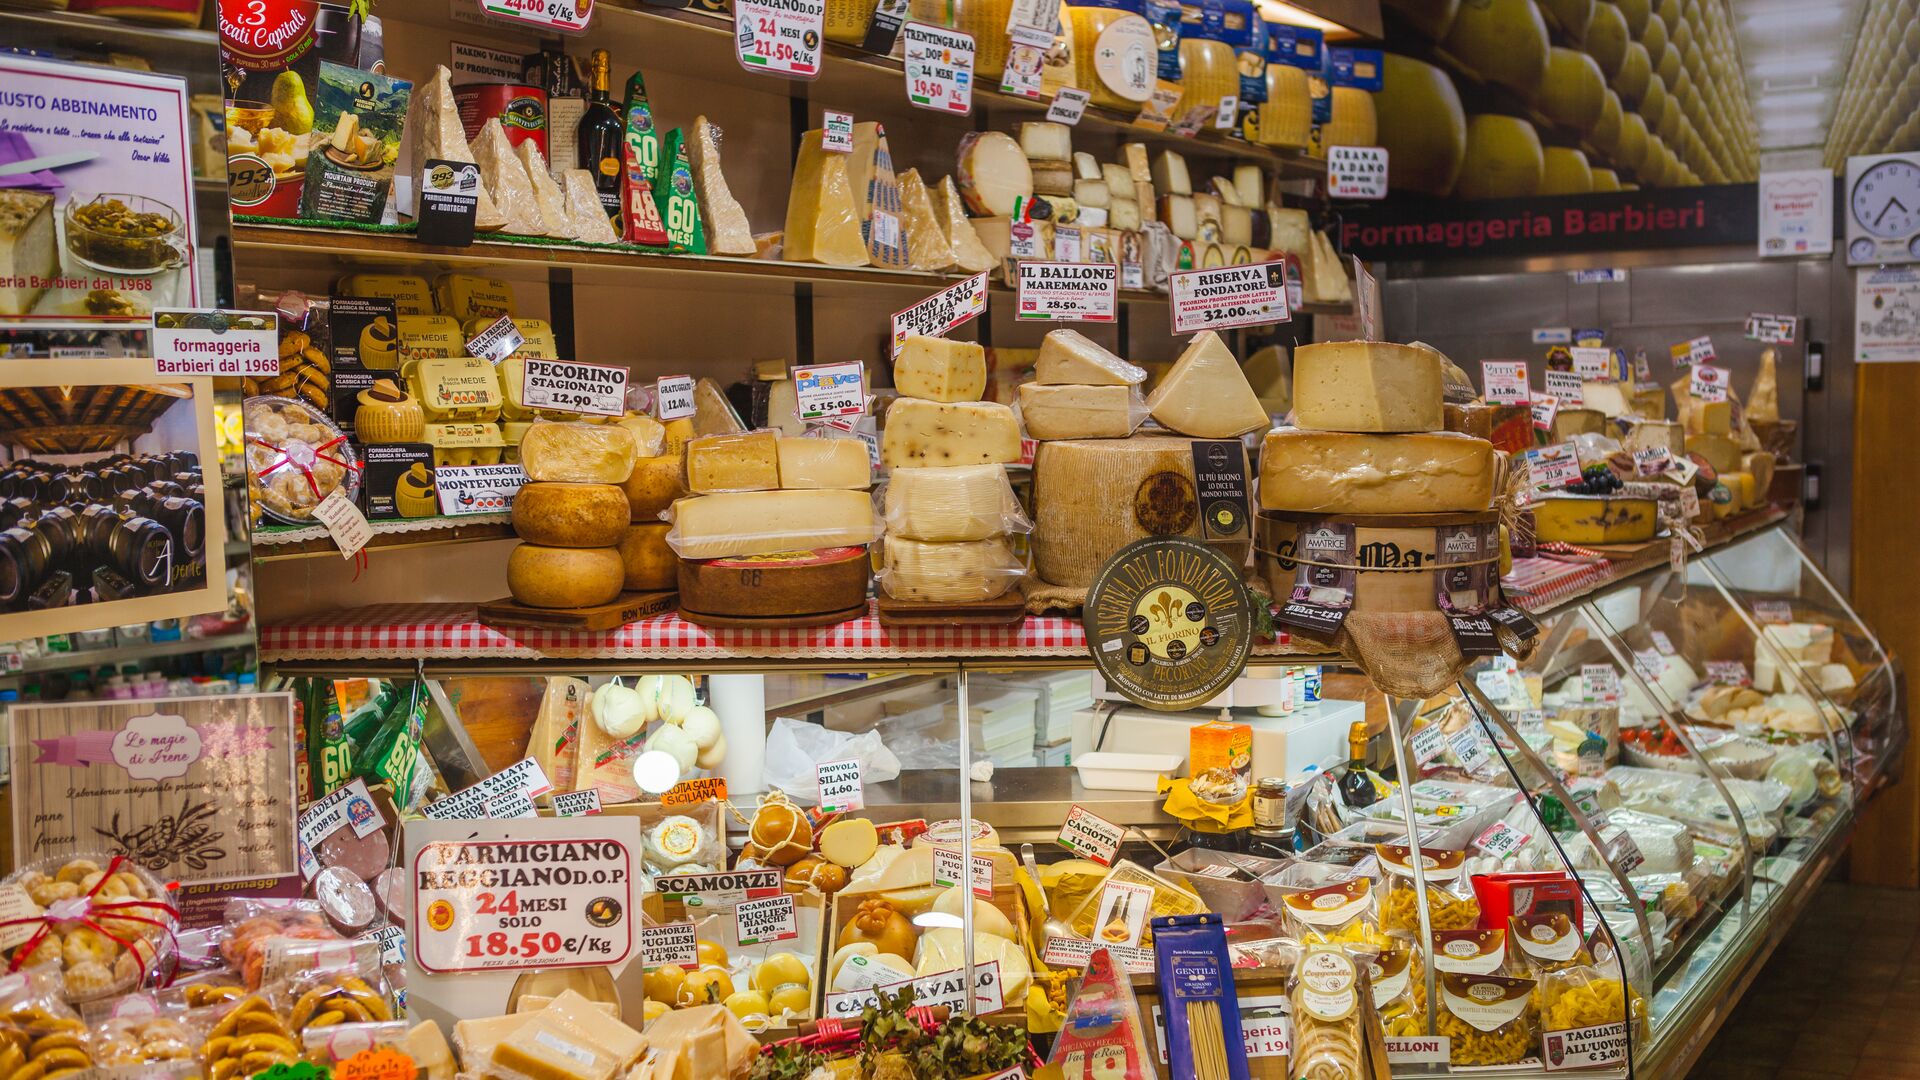 A shop display is stuffed to the brim with different types of cheeses. Black and red signs advertise the name and cost of the cheese.